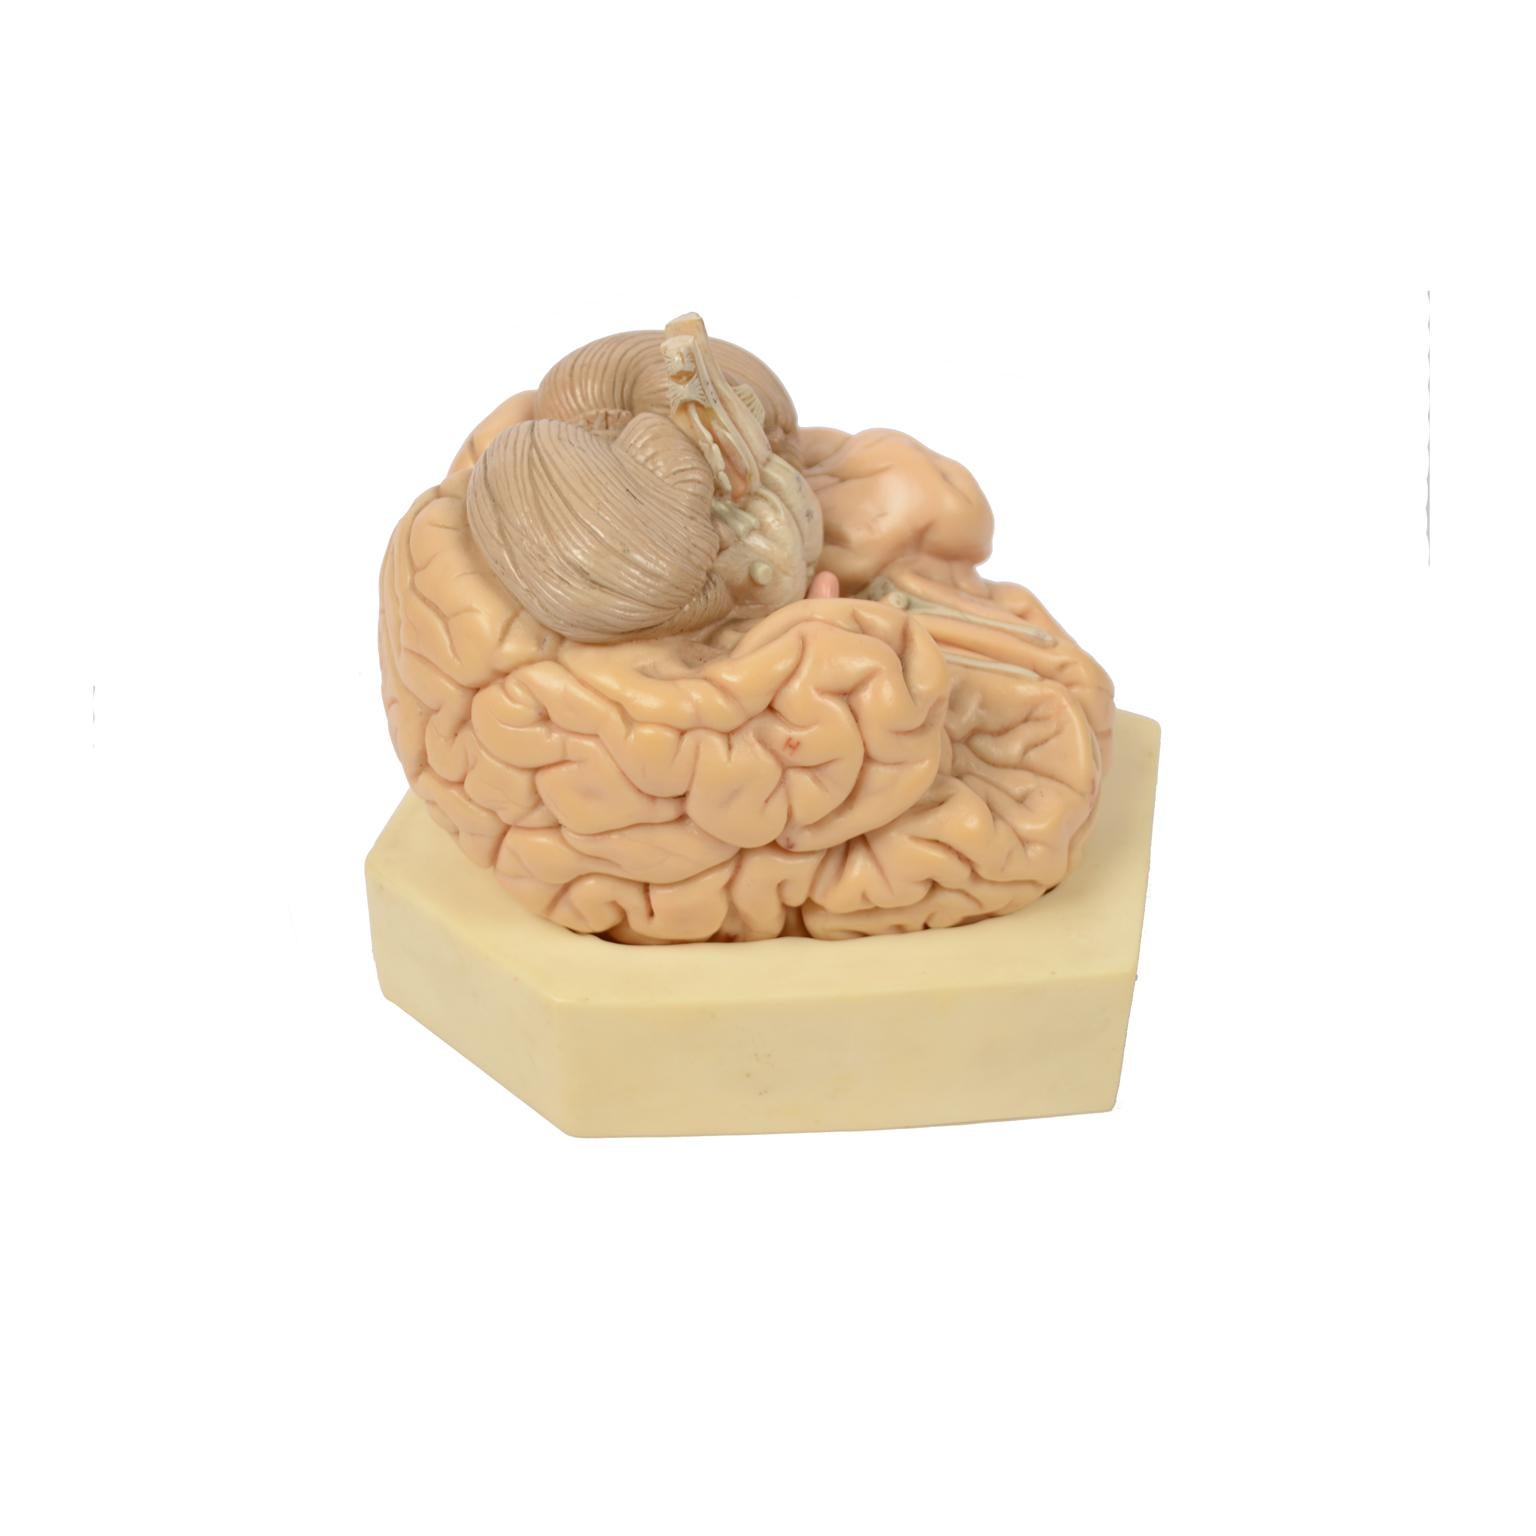 German Didactic Model of a Human Brain 1950s